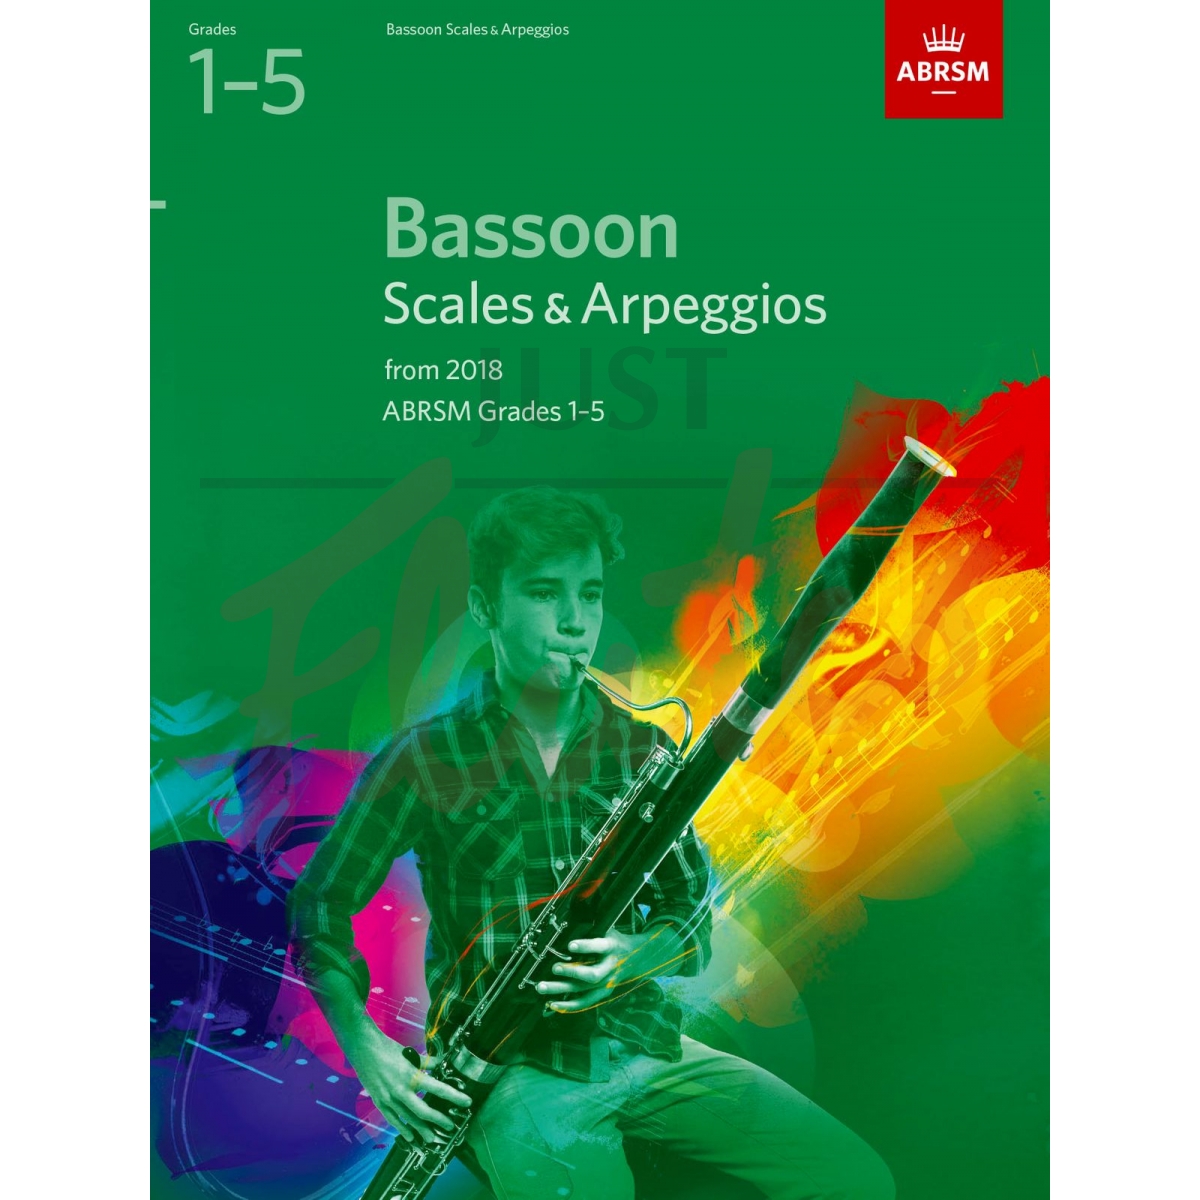 Scales &amp; Arpeggios Grades 1-5 (from 2018) [Bassoon]